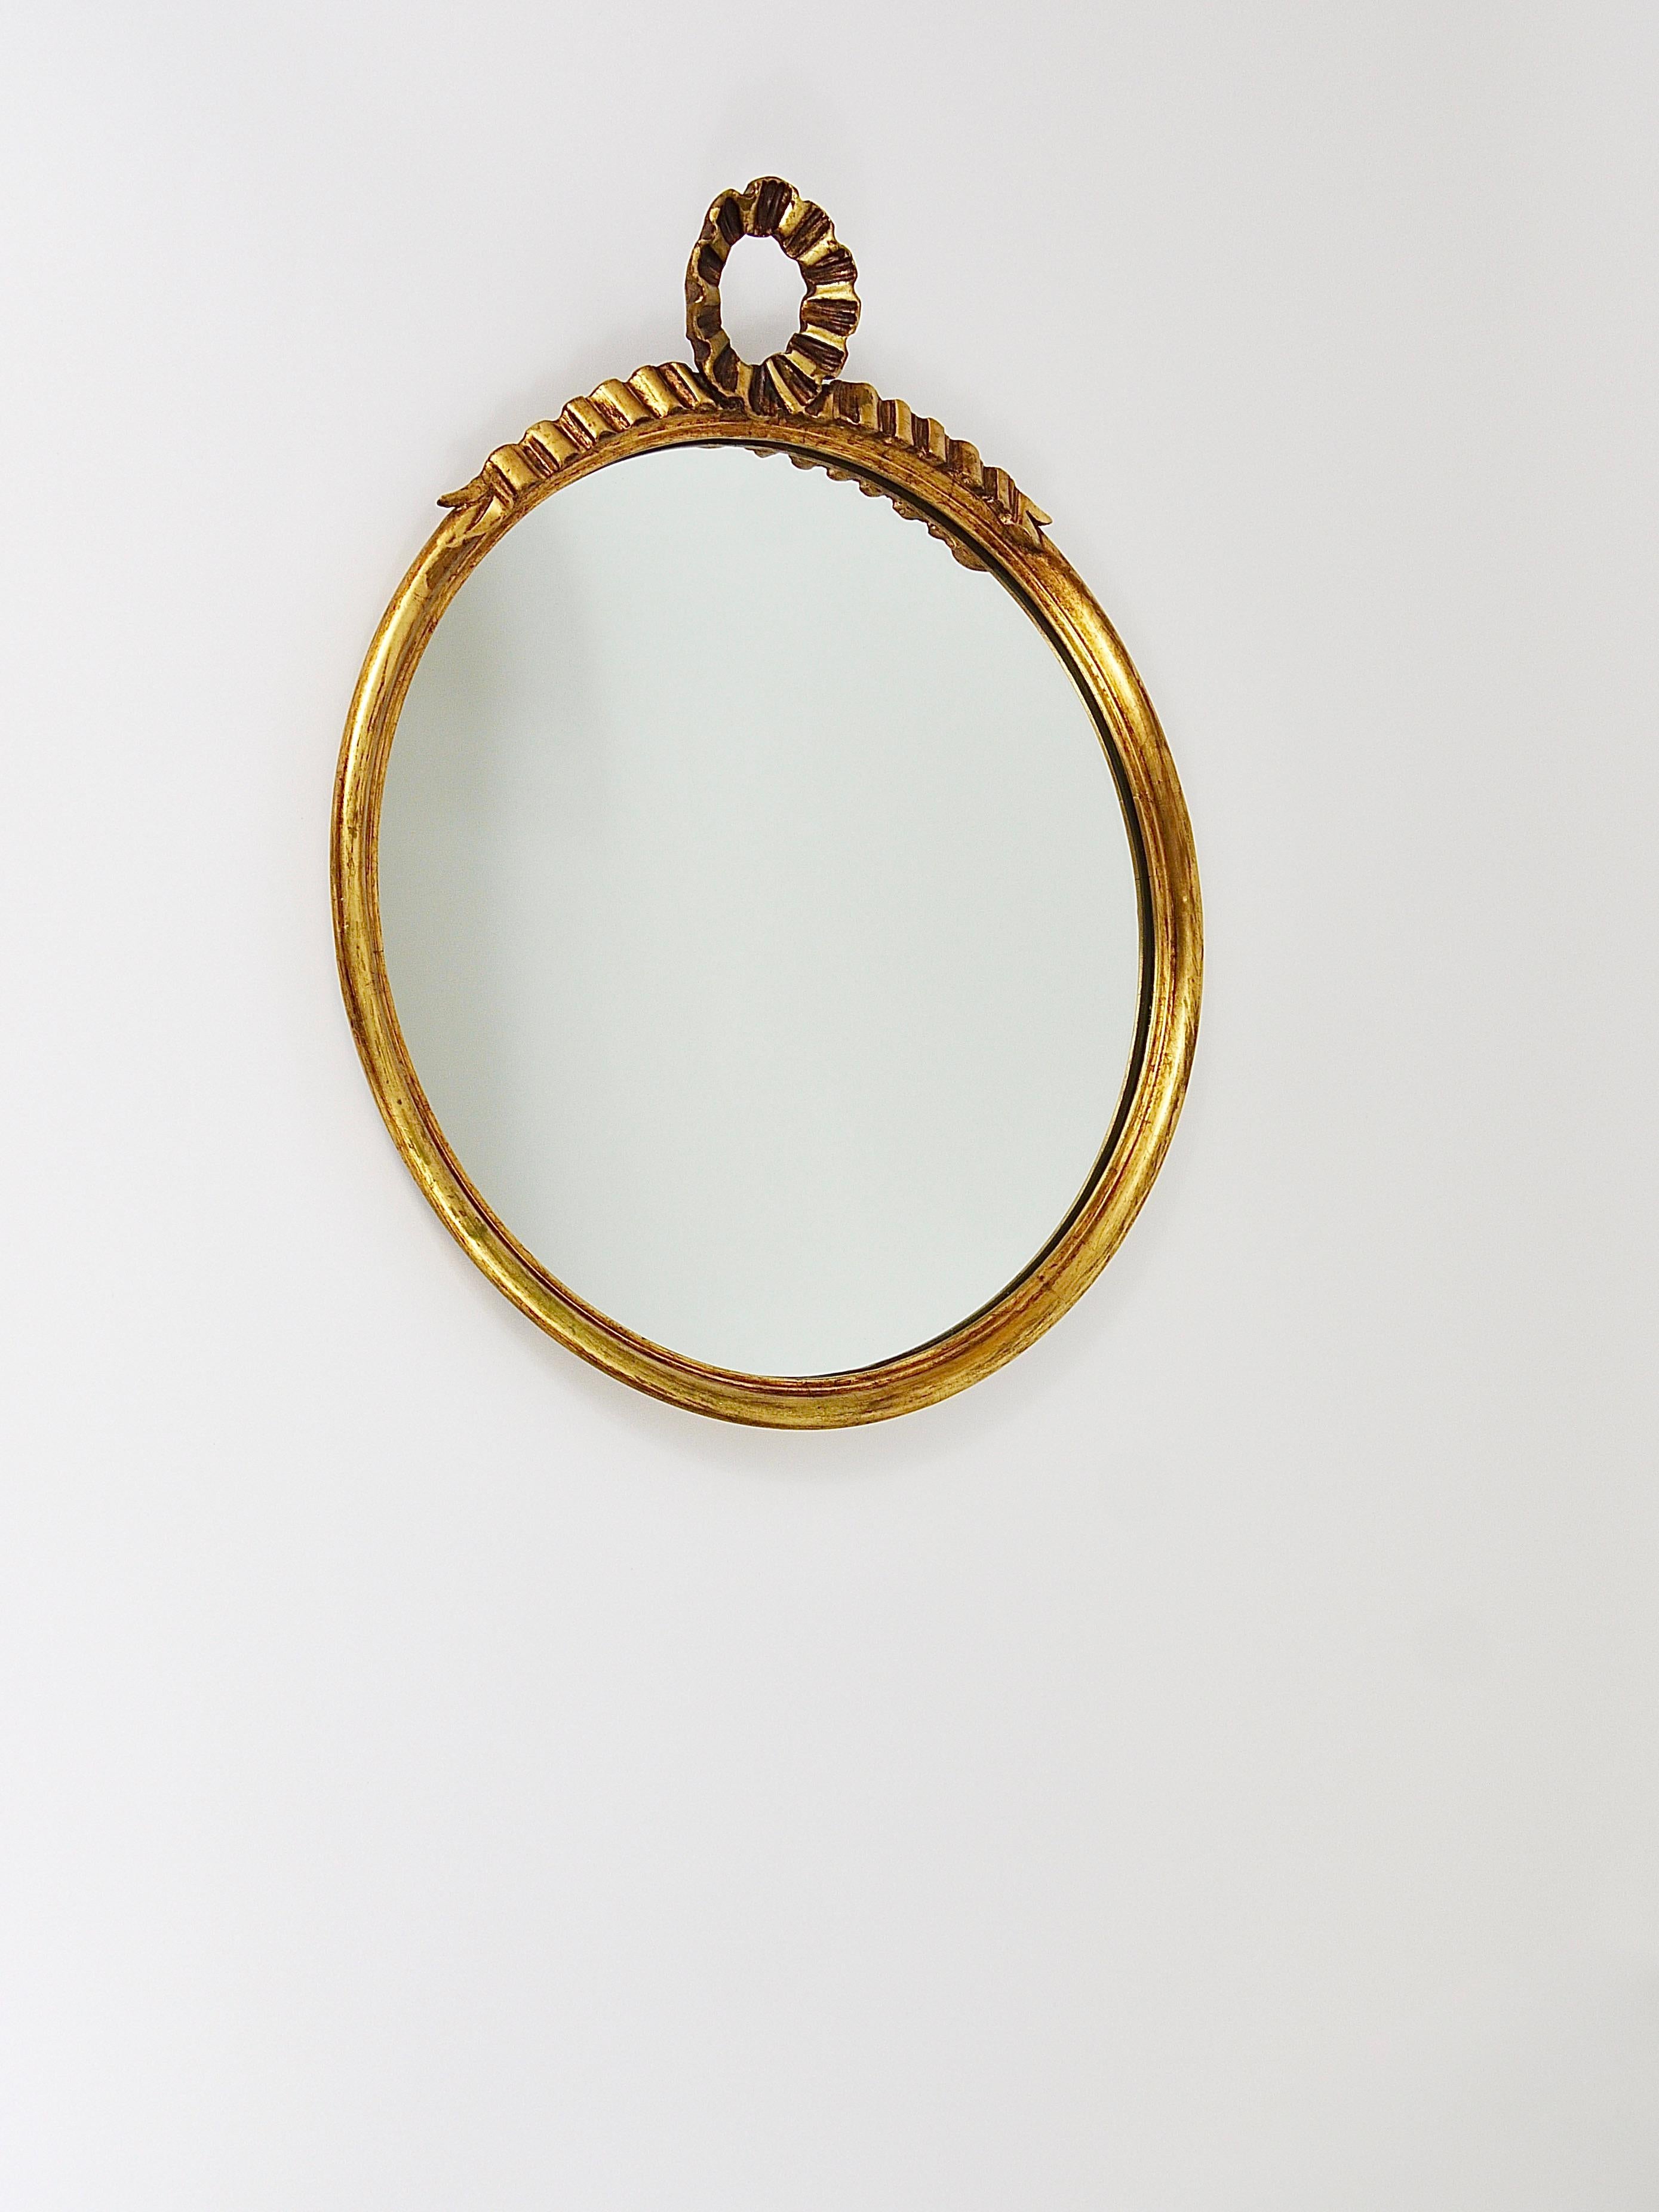 Round Midcentury Gilt Wood Wall Mirror, C. Allodi & G. Subelli, Italy, 1950s For Sale 10